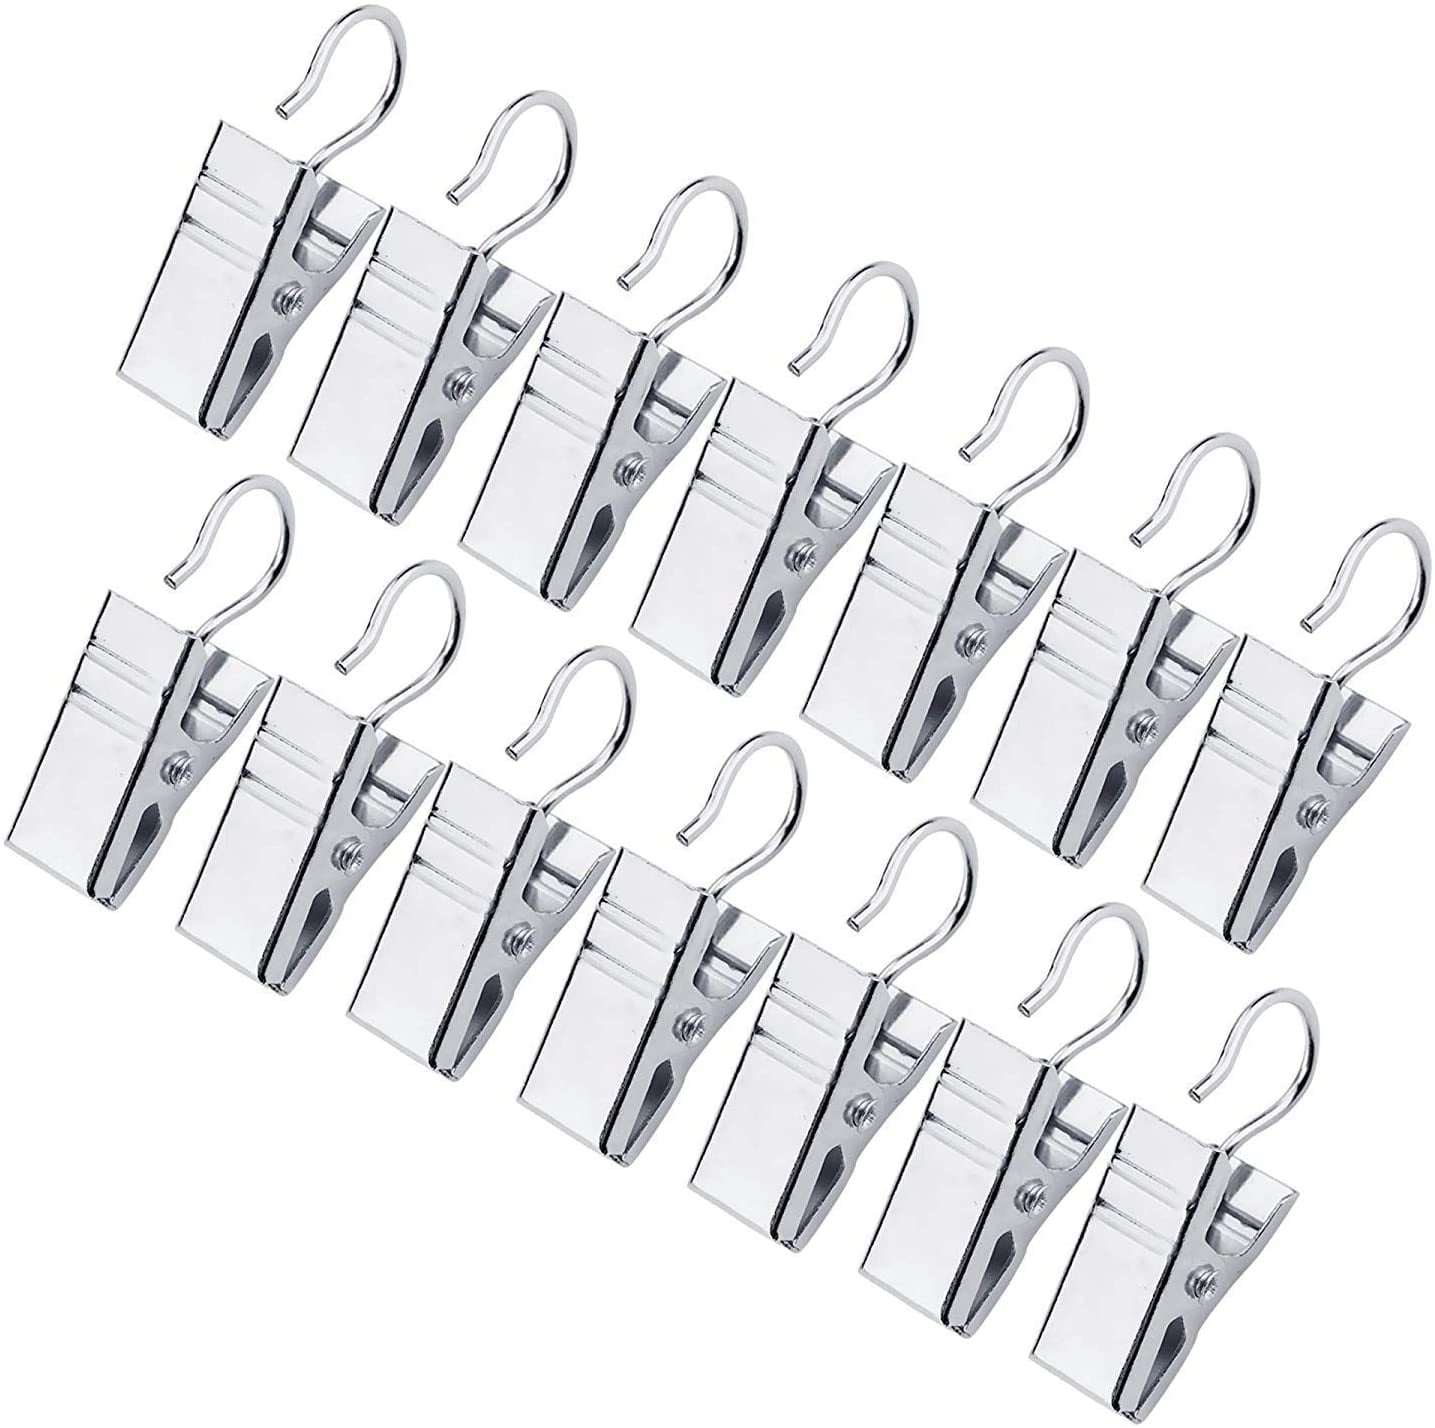 Crylee 5PCS Hanging Metal Towel Clips Stainless Steel Towels Hook Loops Heavy-Duty Shower Curtain Clip String Party Lights Hanger Wire Holder for Photos Decoration Art Craft Display 